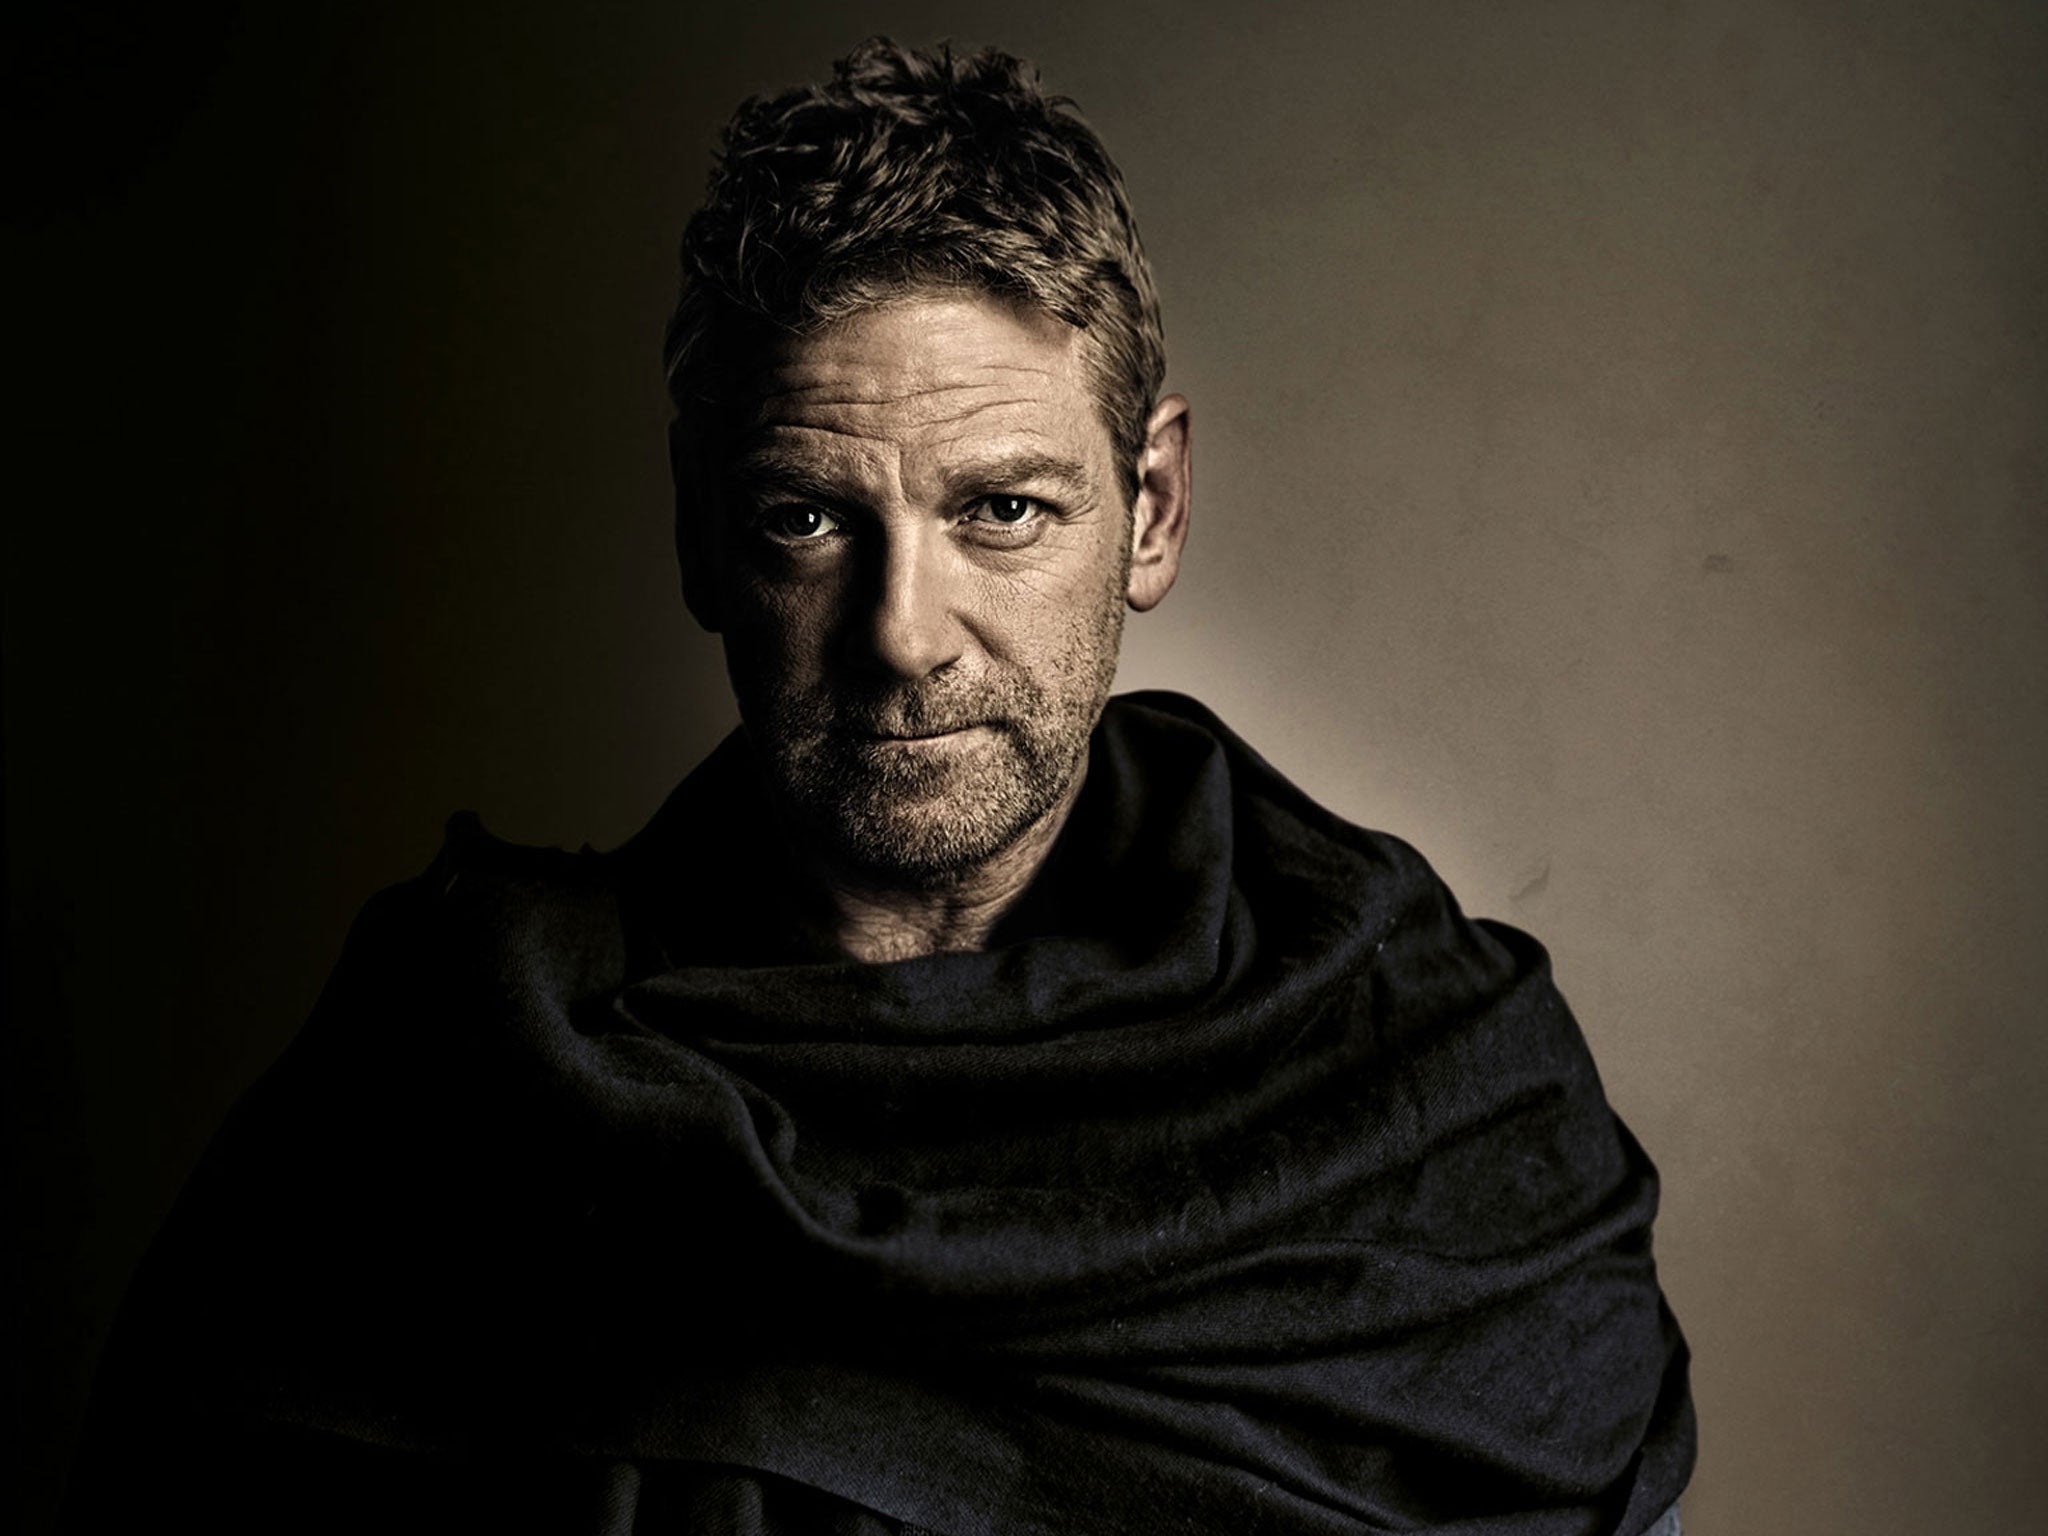 Sir Kenneth Branagh plays Macbeth in a new production at MIF this July